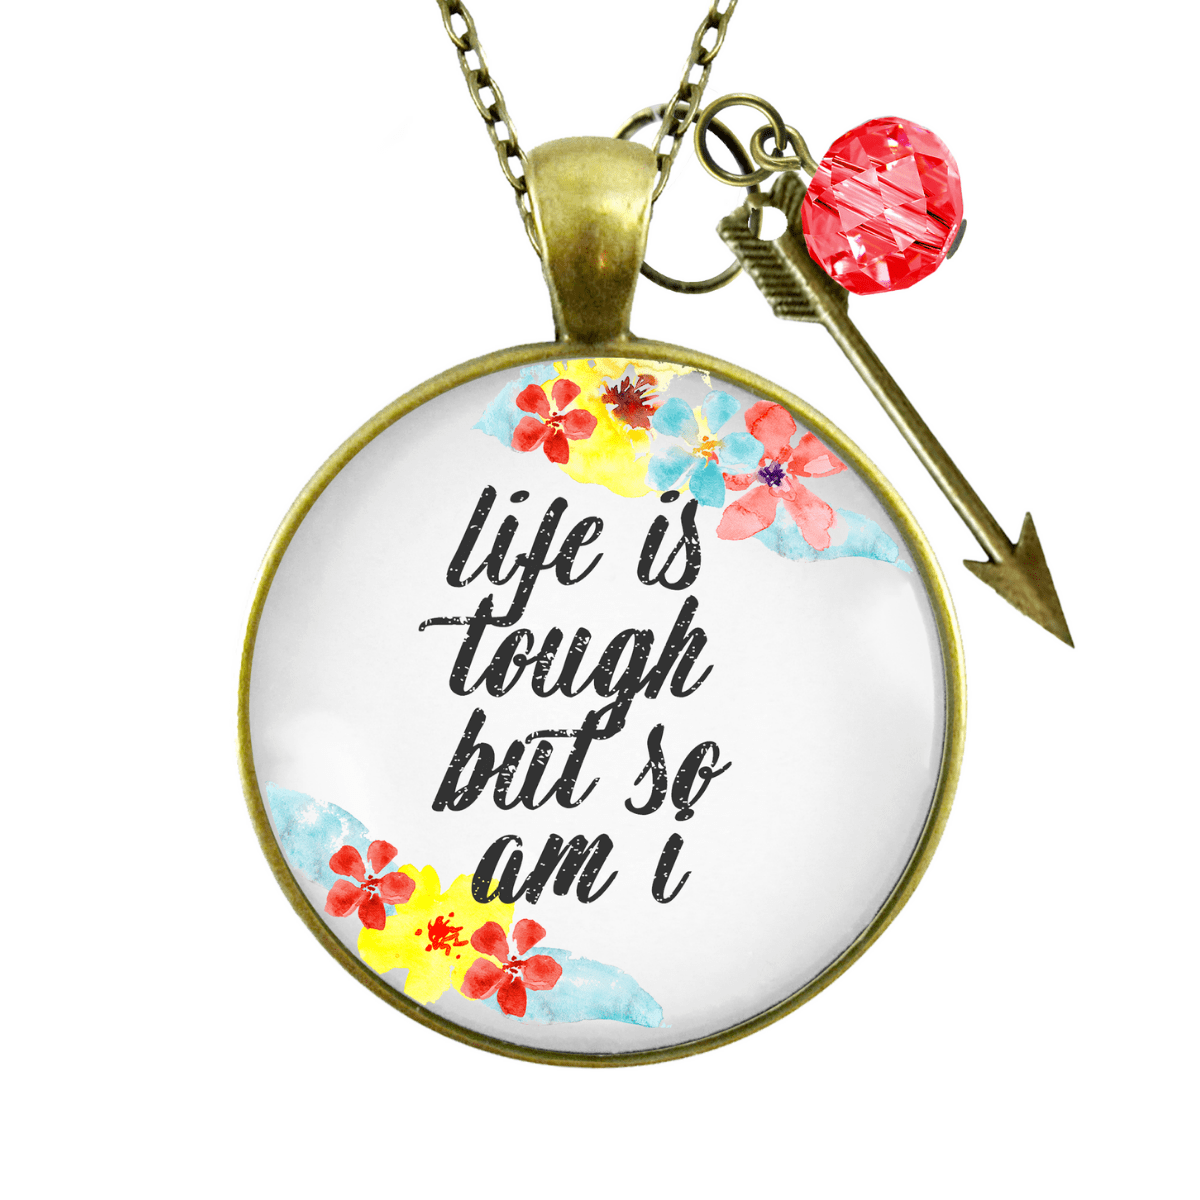 Gutsy Goodness Survivor Necklace Life is Tough But So Am I Women Strength Jewelry - Gutsy Goodness Handmade Jewelry;Survivor Necklace Life Is Tough But So Am I Women Strength Jewelry - Gutsy Goodness Handmade Jewelry Gifts